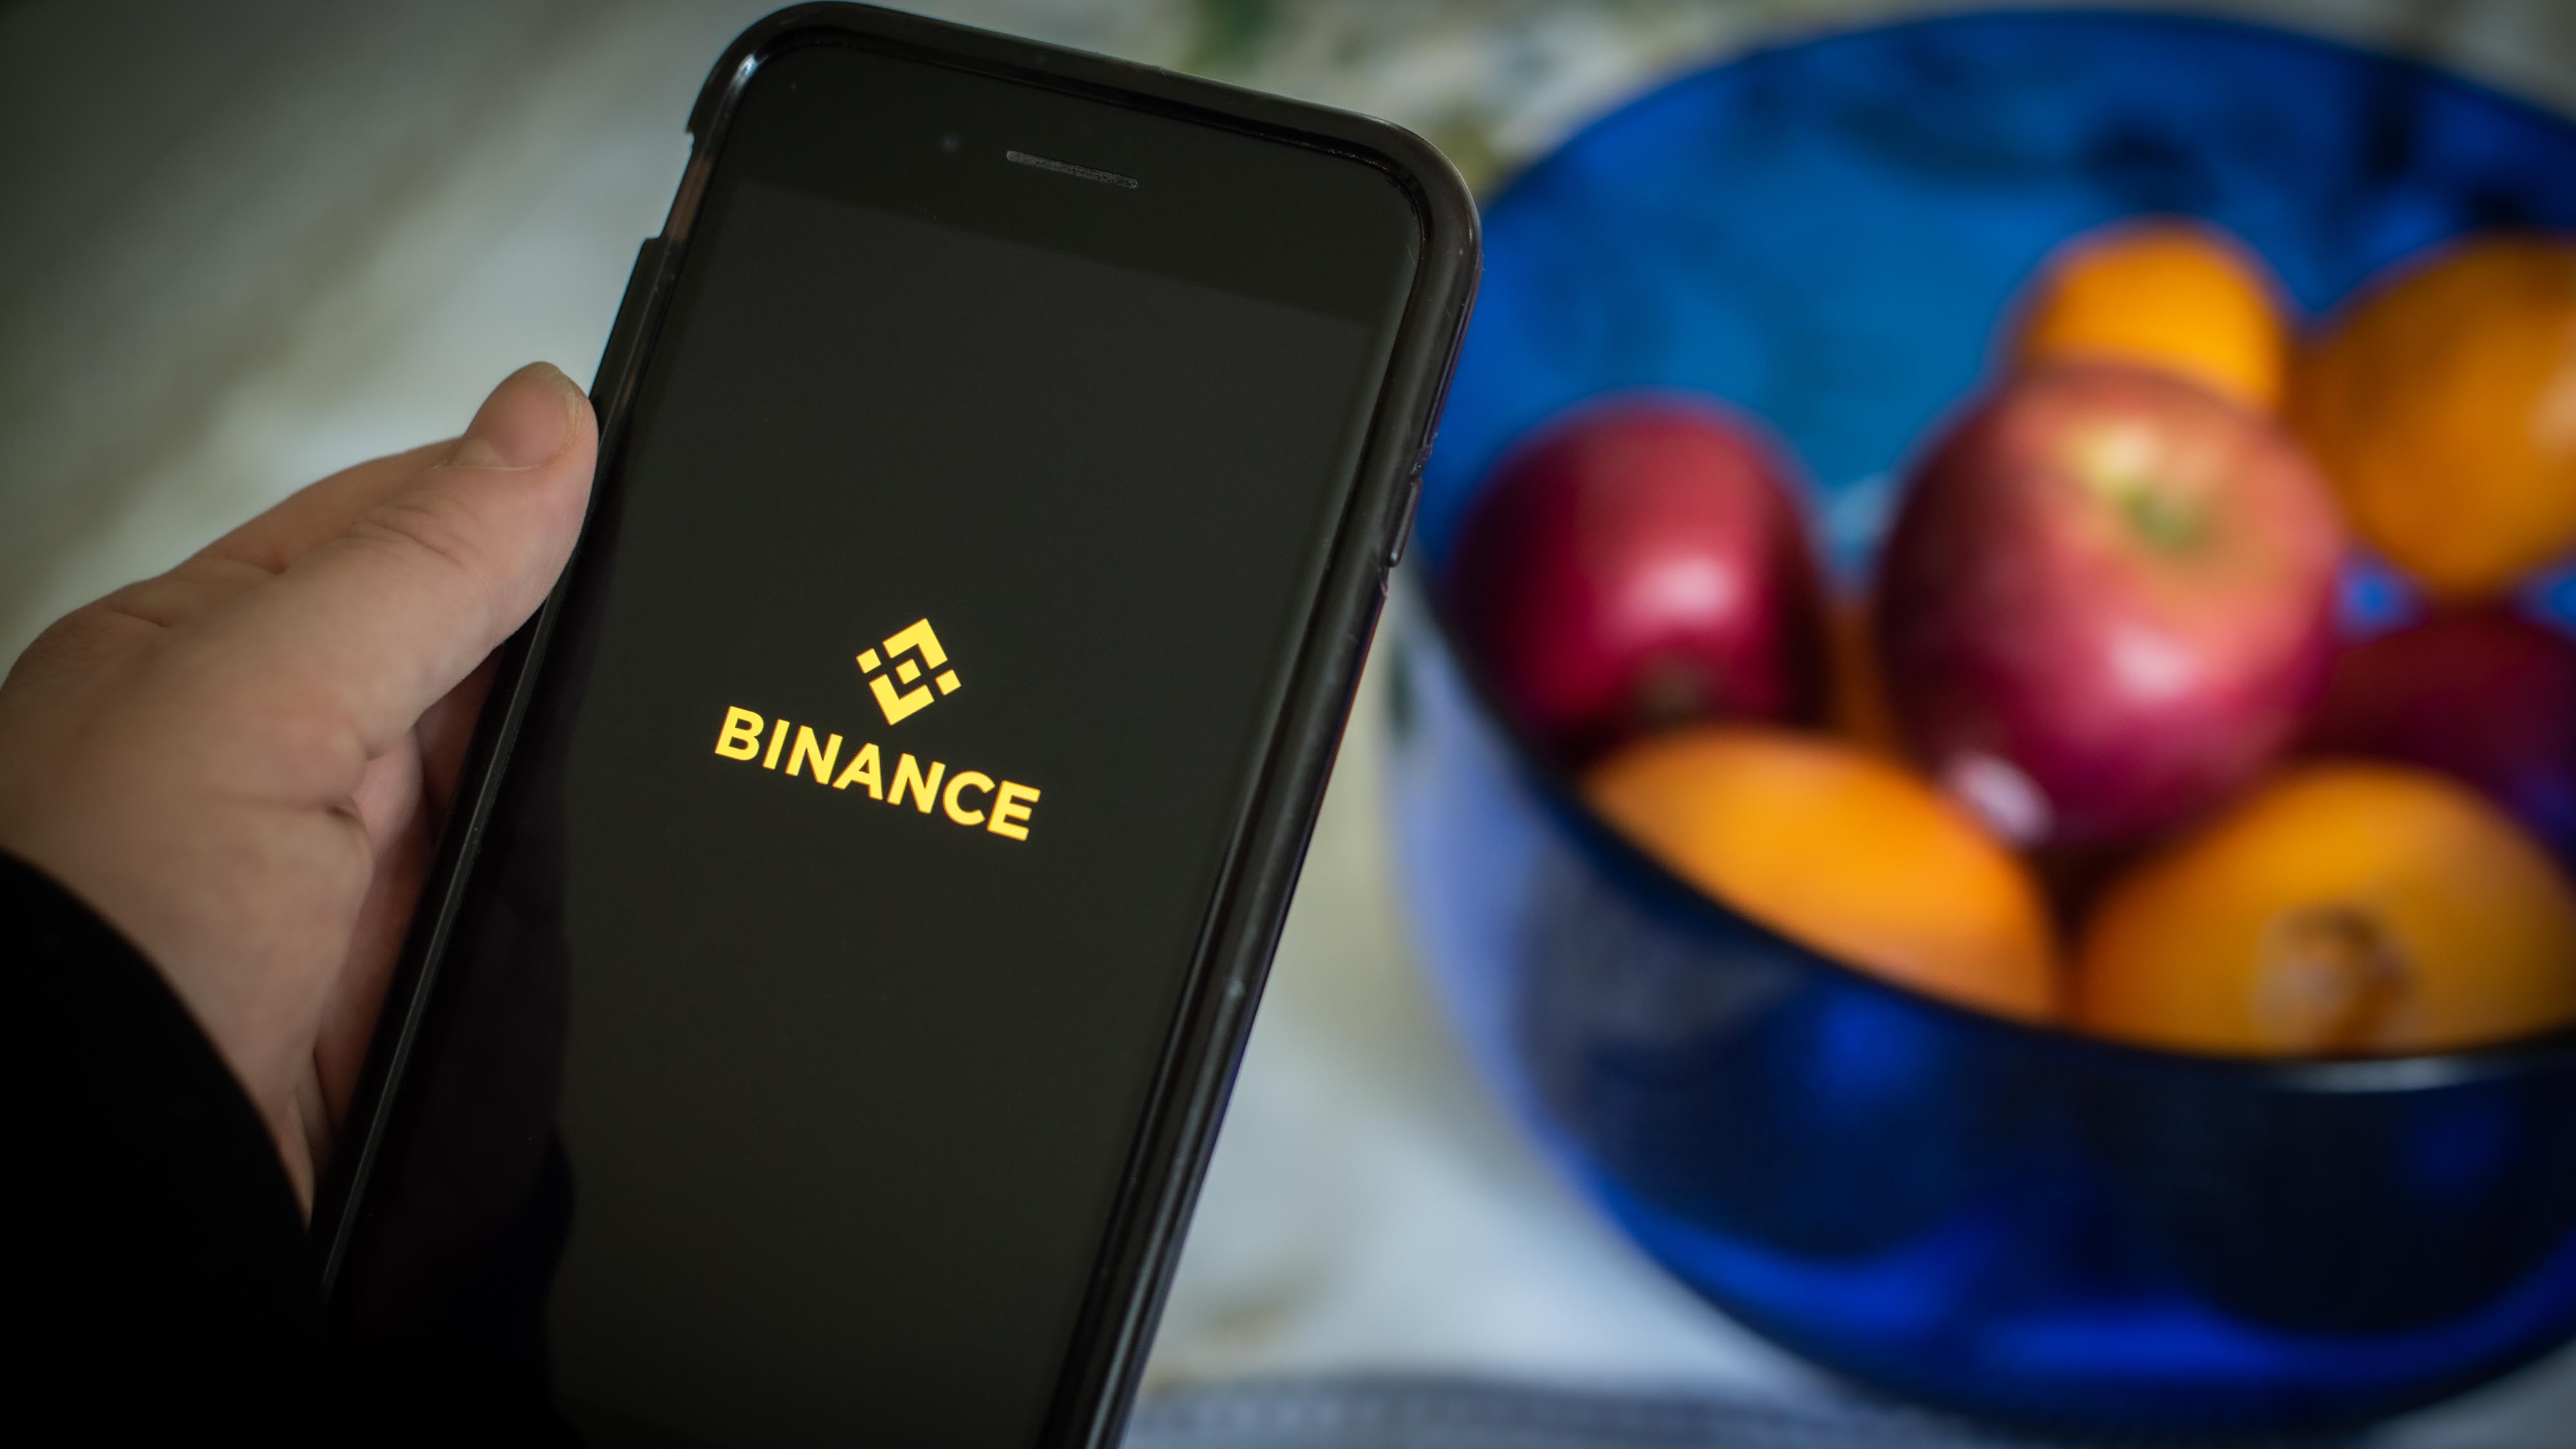 Binance Faces Probe by U.S. Money-Laundering and Tax Sleuths - Bloomberg